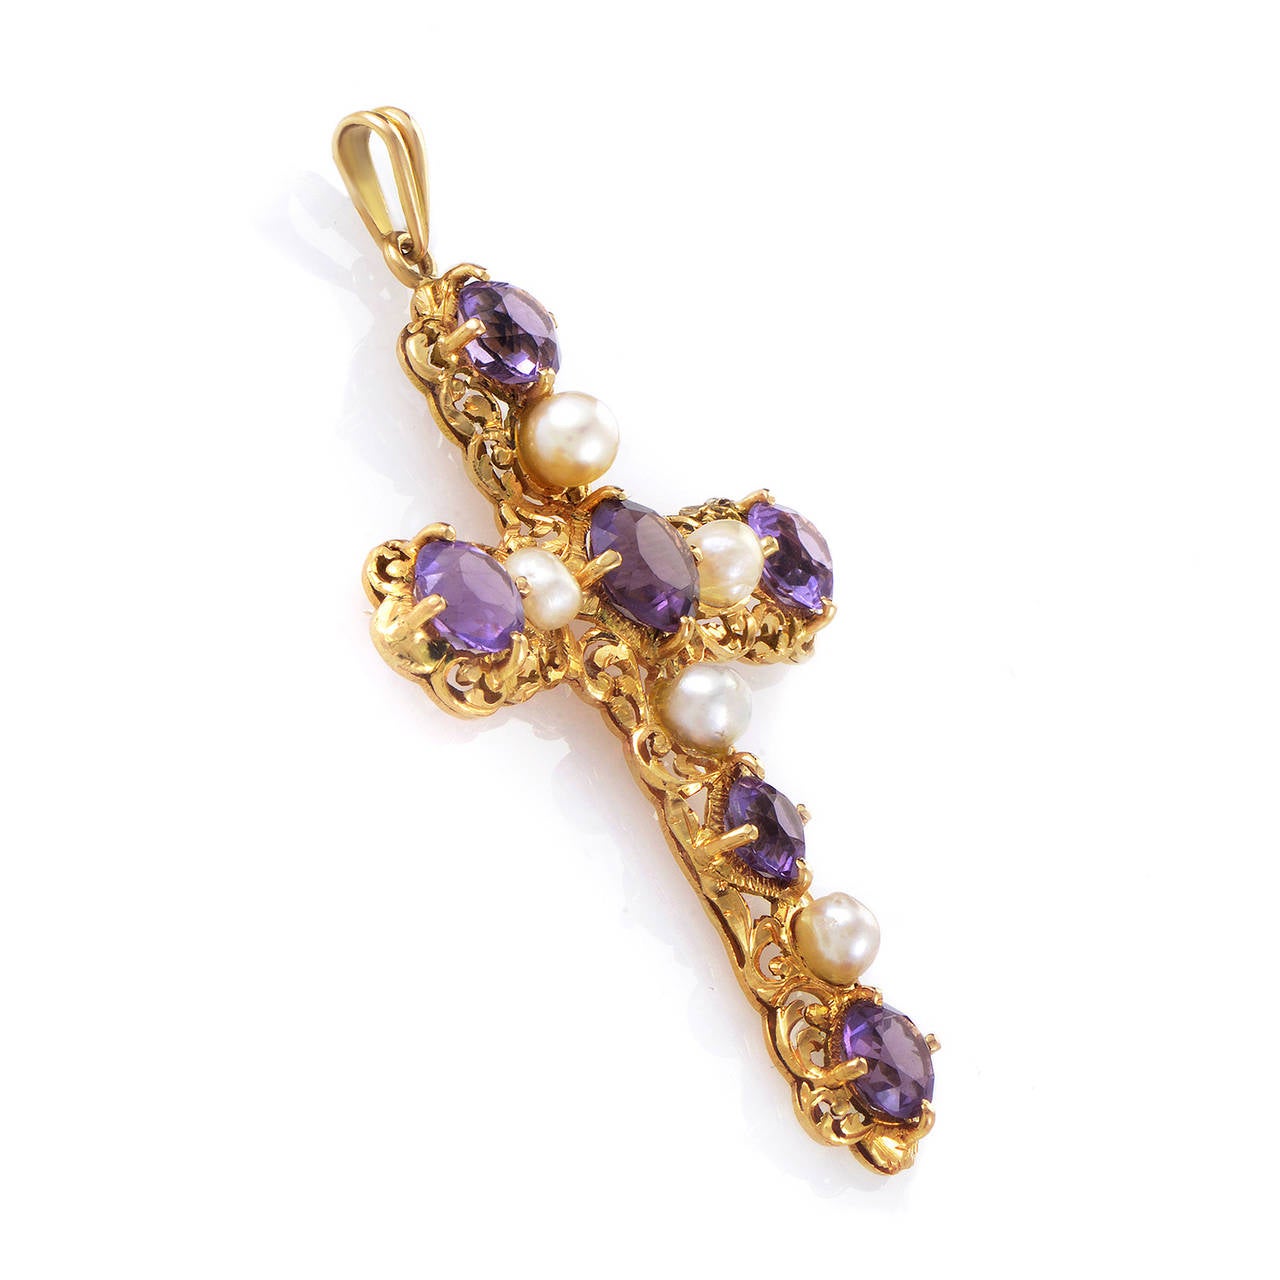 A unique take on a classic design, this pendant is perfect for a lady who enjoys classic style with a twist. The pendant is made of 18K yellow gold and is set with amethysts and pearls.